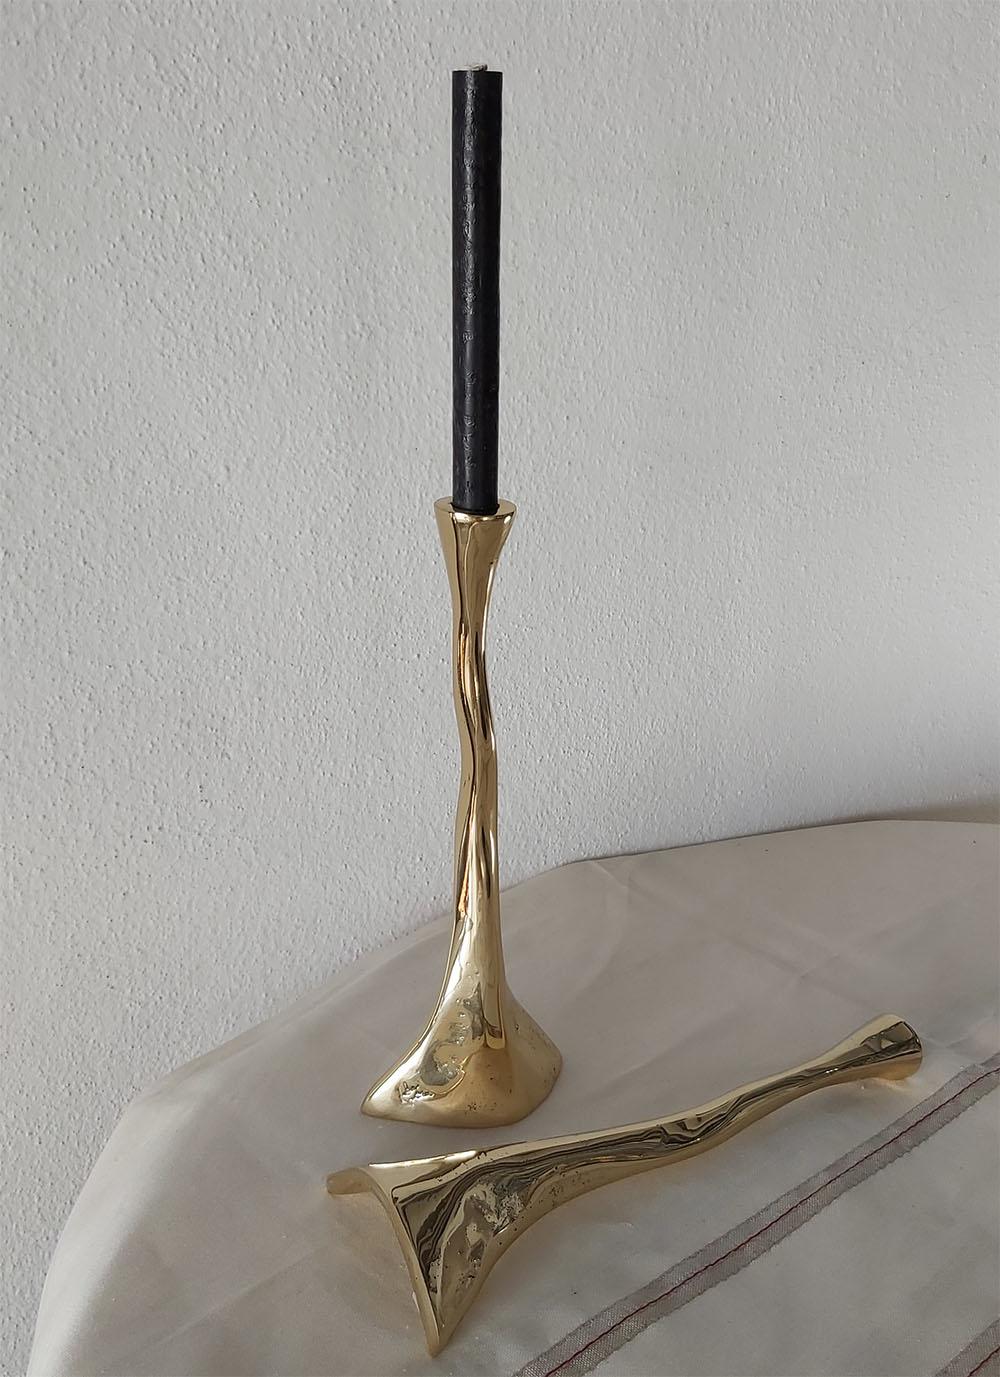 Contemporary Candelabra Cobra G022 Cast Brass Gold coloured made in Spain by David Marshall For Sale